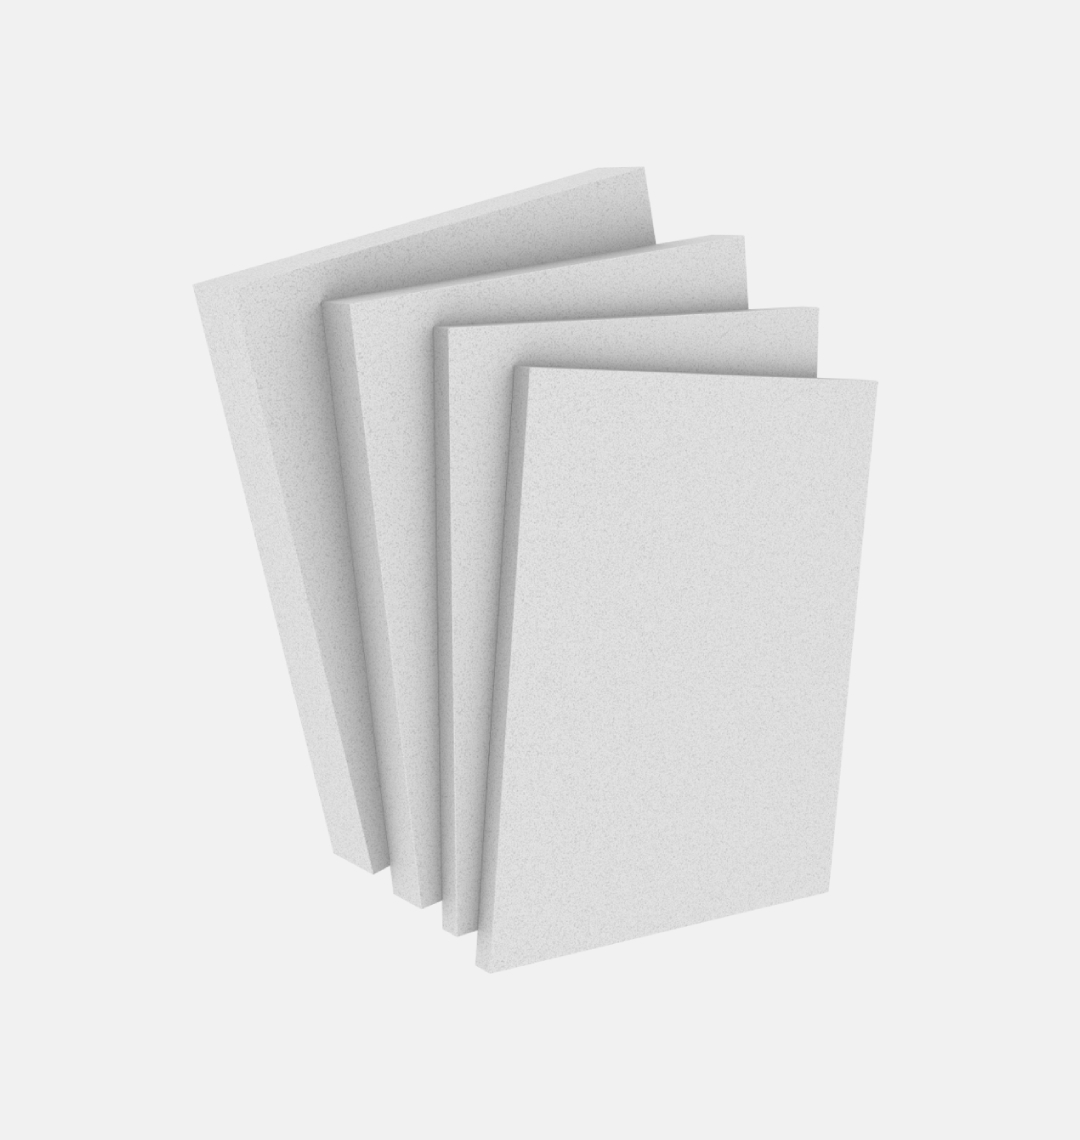 Expanded Polystyrene Insulation Boards - hikae equs